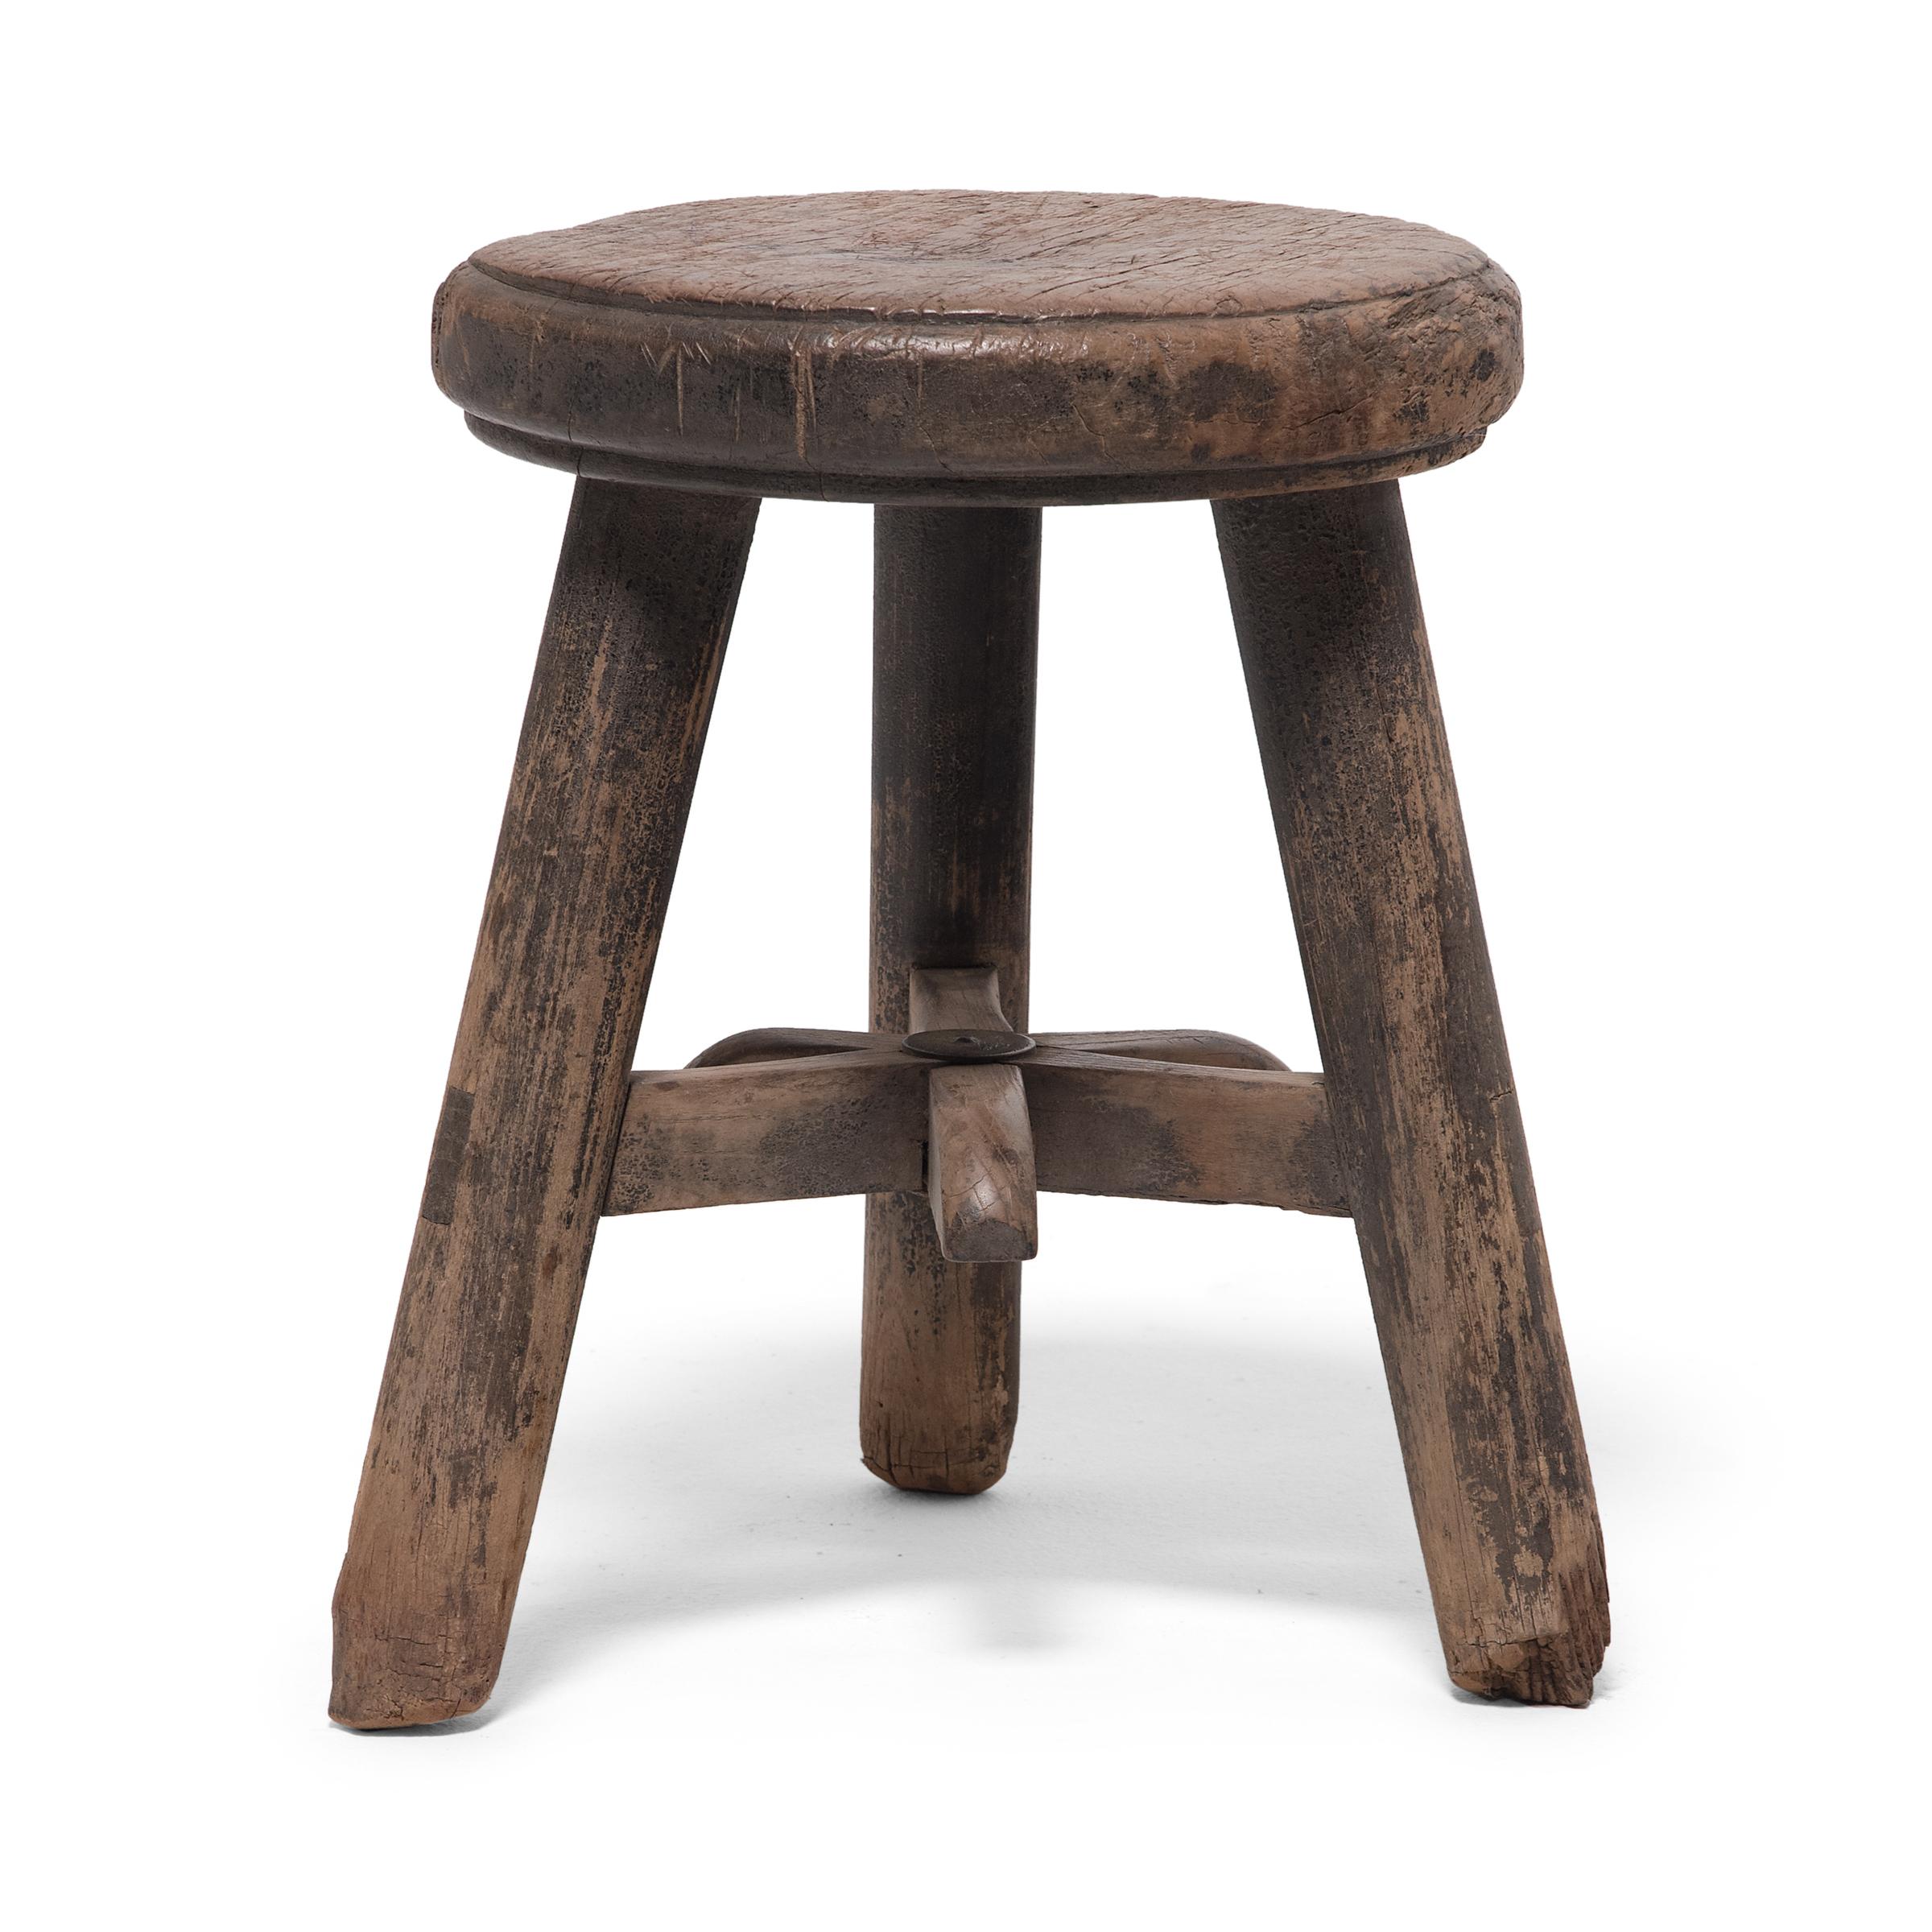 This 19th century stool from China's Shanxi province charms with its top-heavy form and fantastic texture. As evidenced by the many blade marks on its round top, this robust stool was doubled as a kitchen chopping block. The seat is supported by